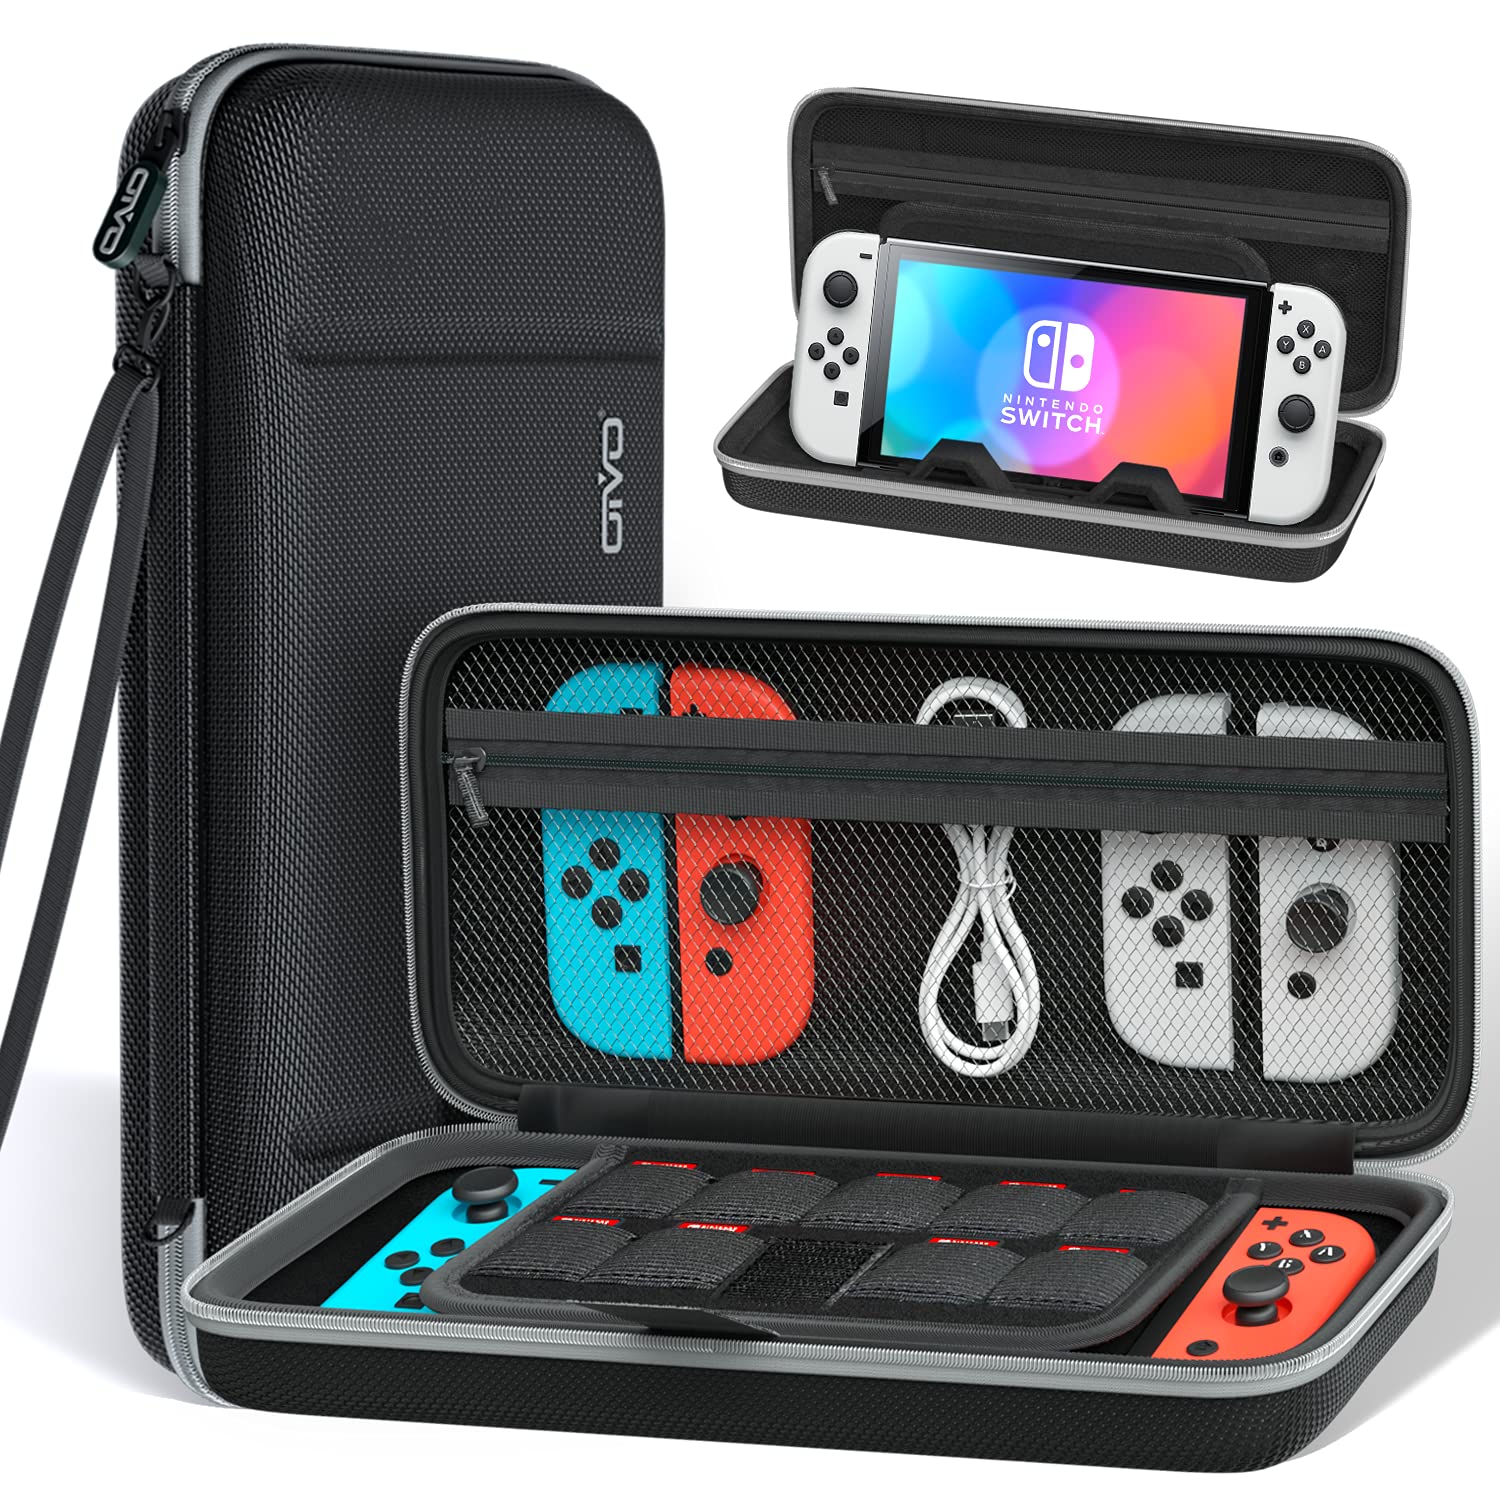 OIVO Switch Carrying Case for Nintendo Switch OLED Mode, Protable Travel Case Cover with Game Card Slots, Upgraded Console Stand Holder for Nintendo Switch/Switch OLED Accessories